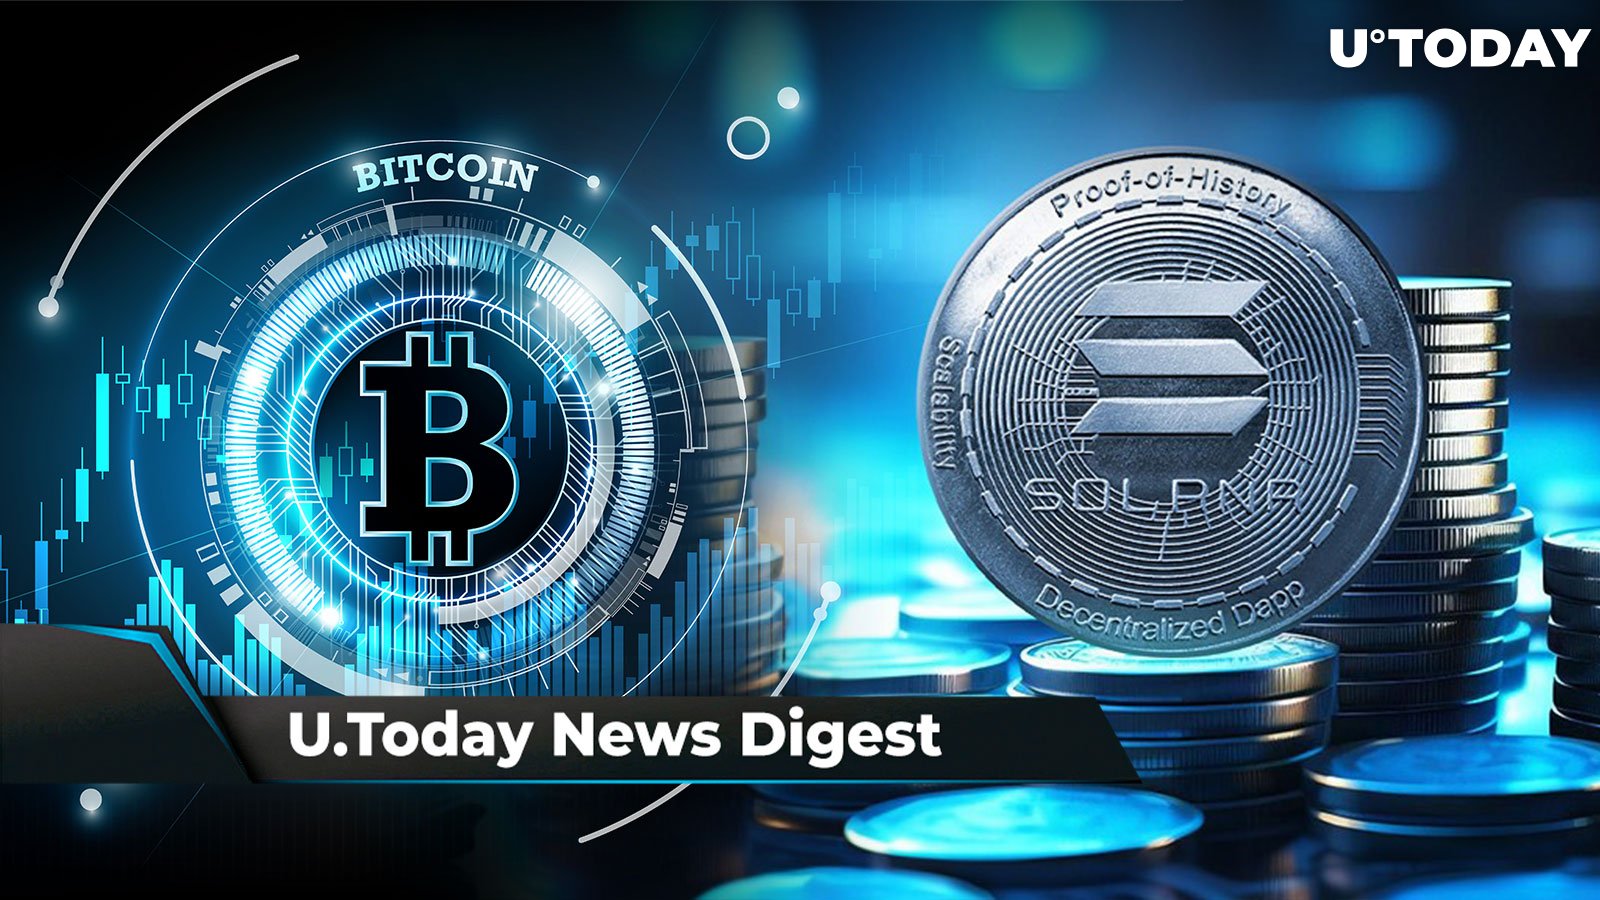 Solana Flips Binance Coin to Become Fourth Biggest Crypto, Bitcoin Reaches New All-Time High, Shiba Inu Sees 8 Trillion Token Withdrawal: Crypto News Digest by U.Today